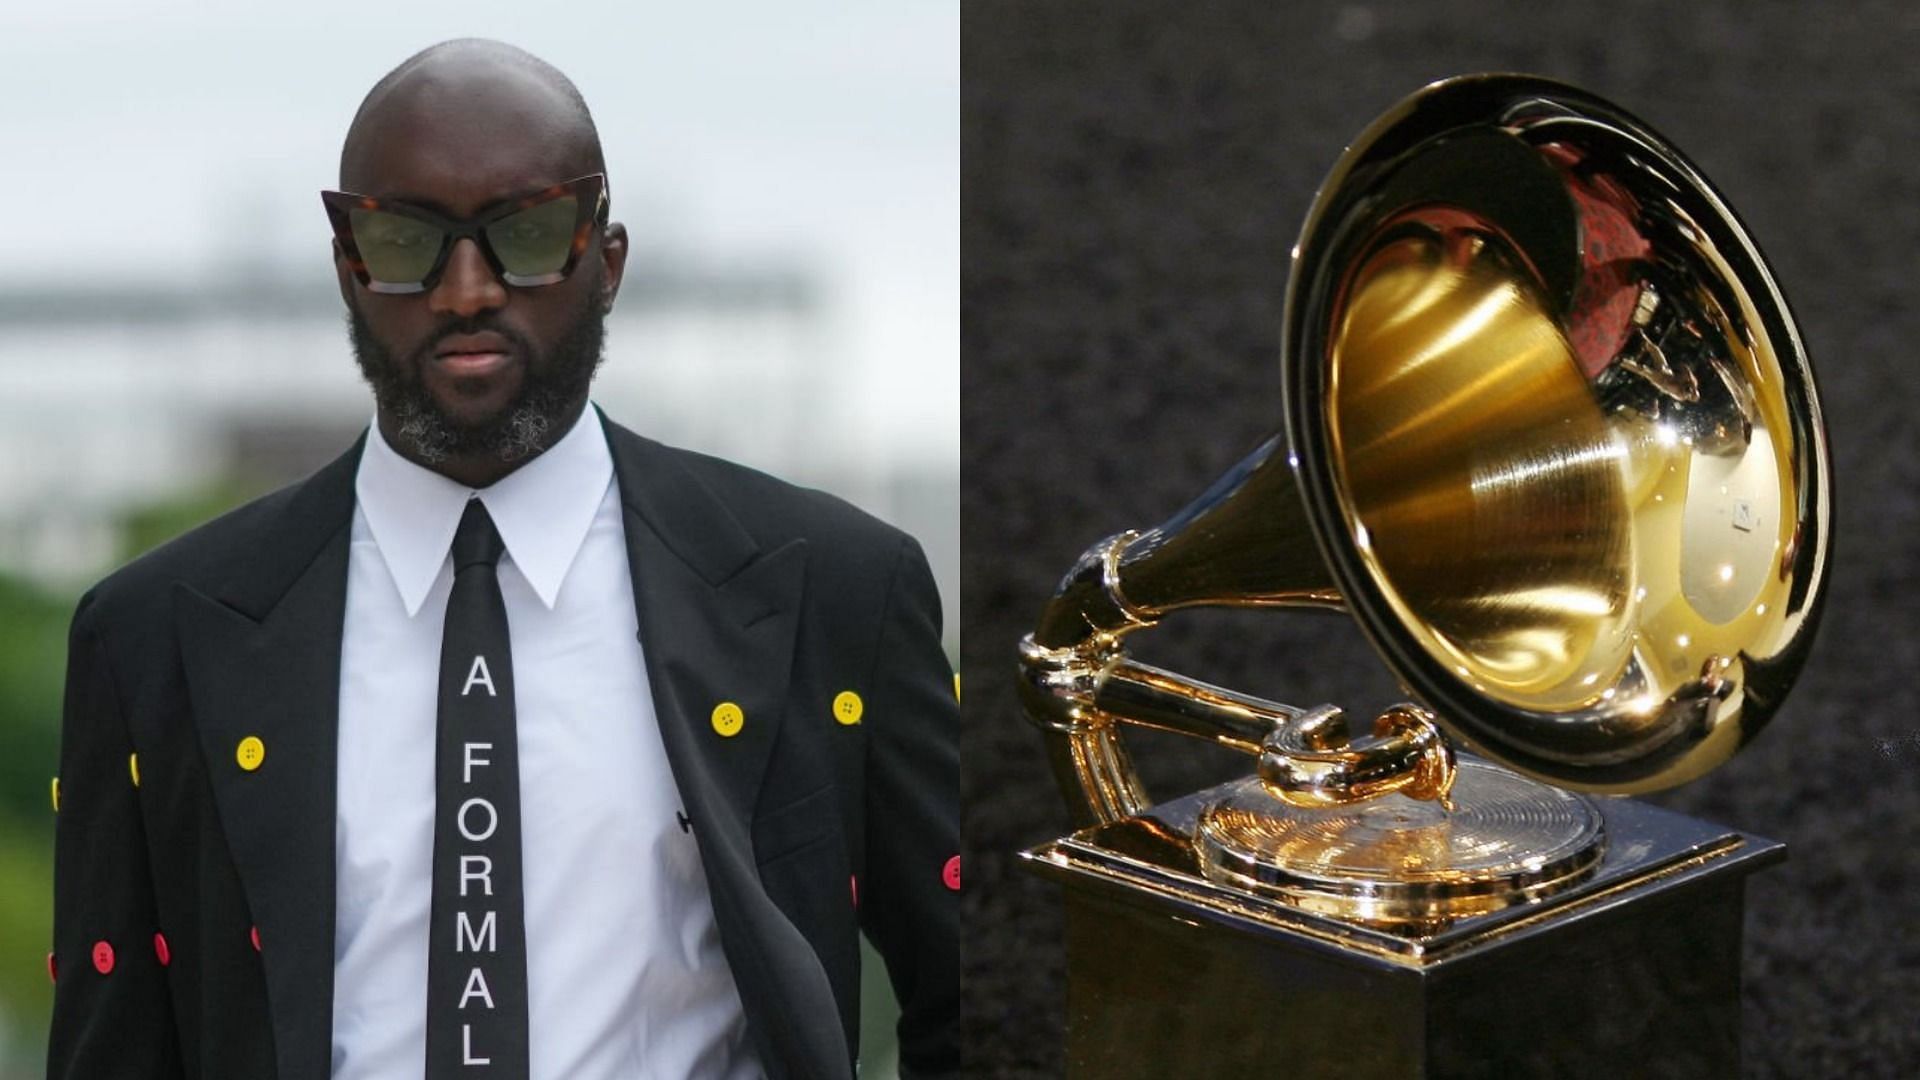 Virgil Abloh Grammys controversy explained as ‘HipHop fashion designer